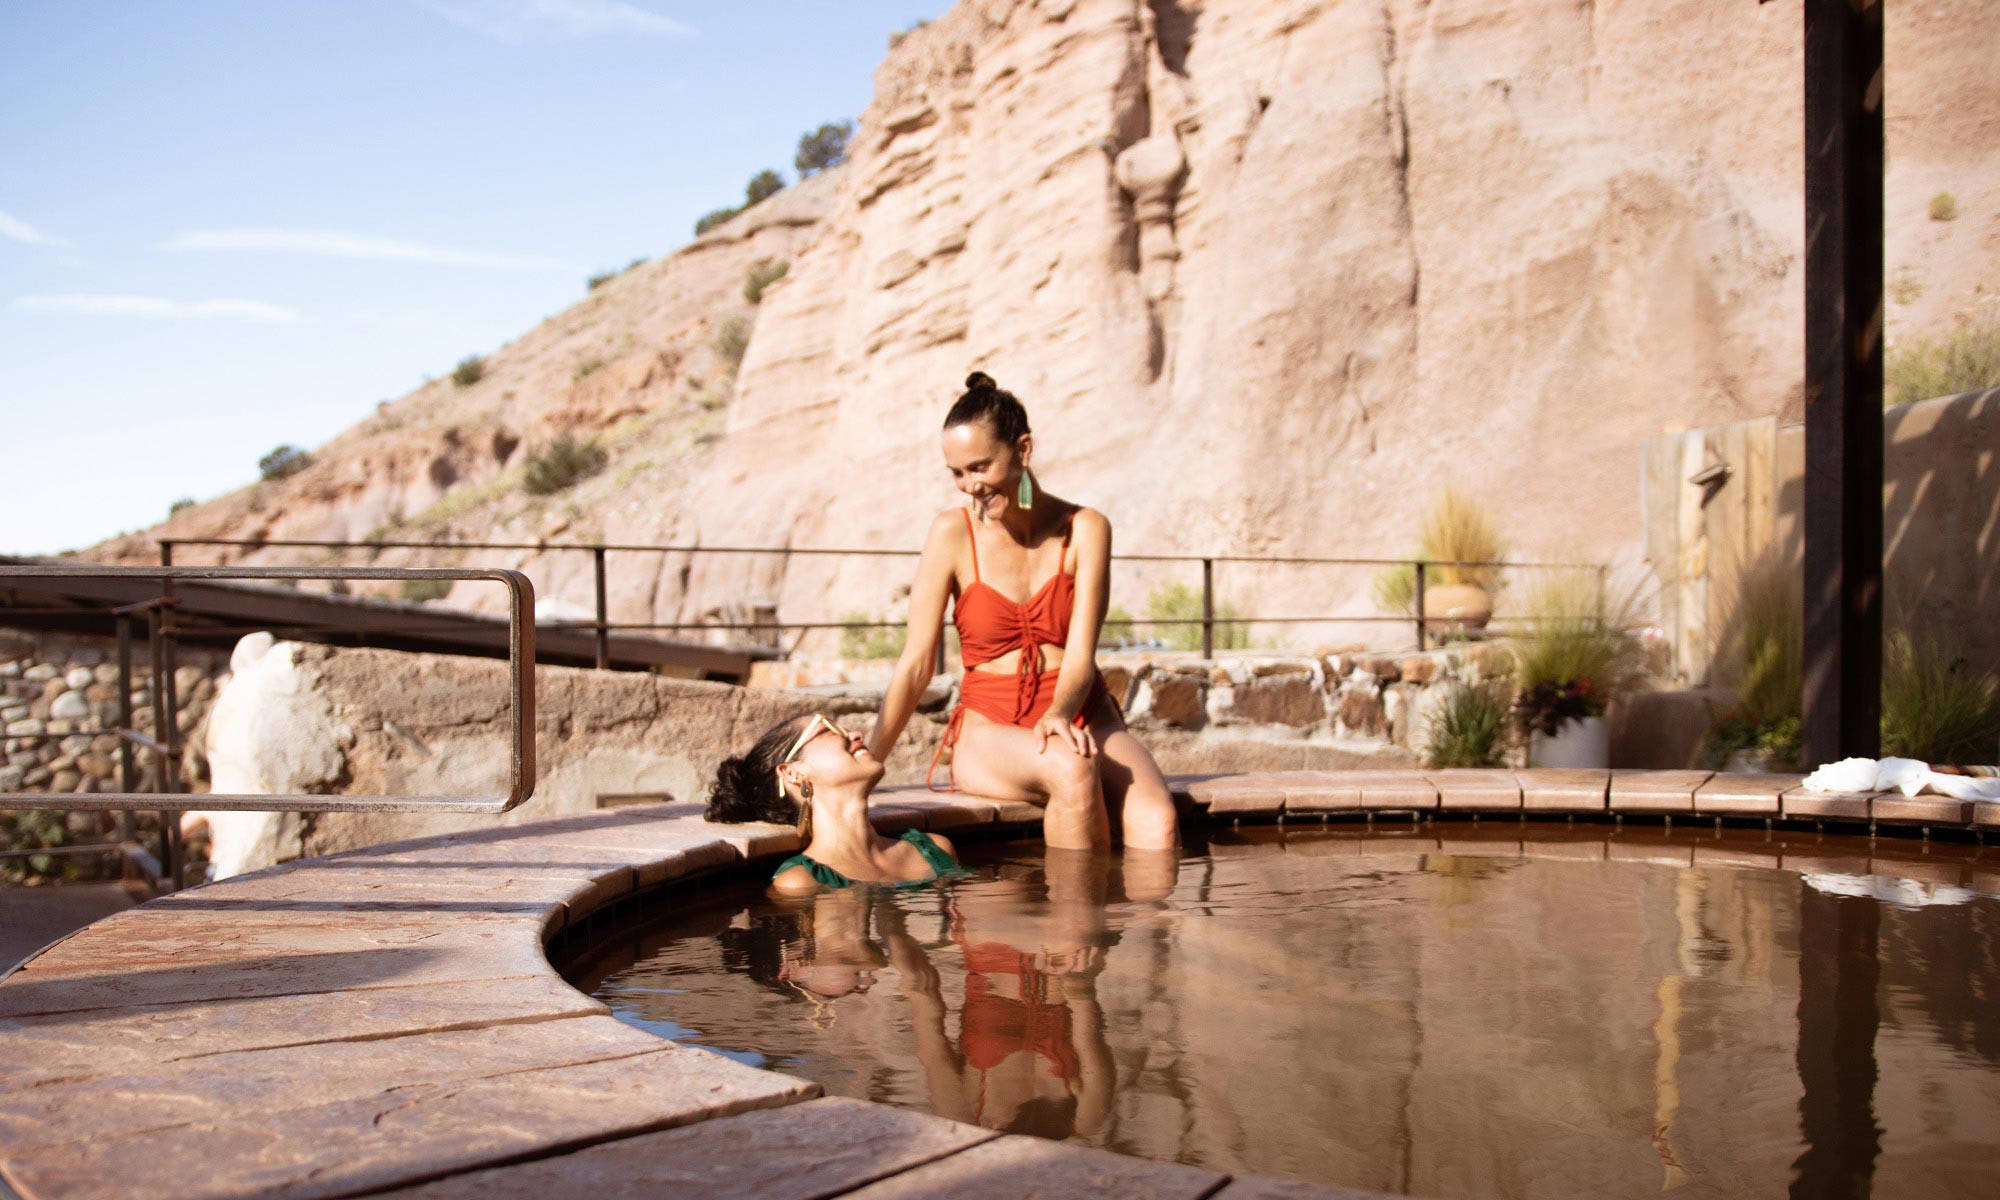 Two women in swimsuits soaking in a round pool with tan cliffs in the background